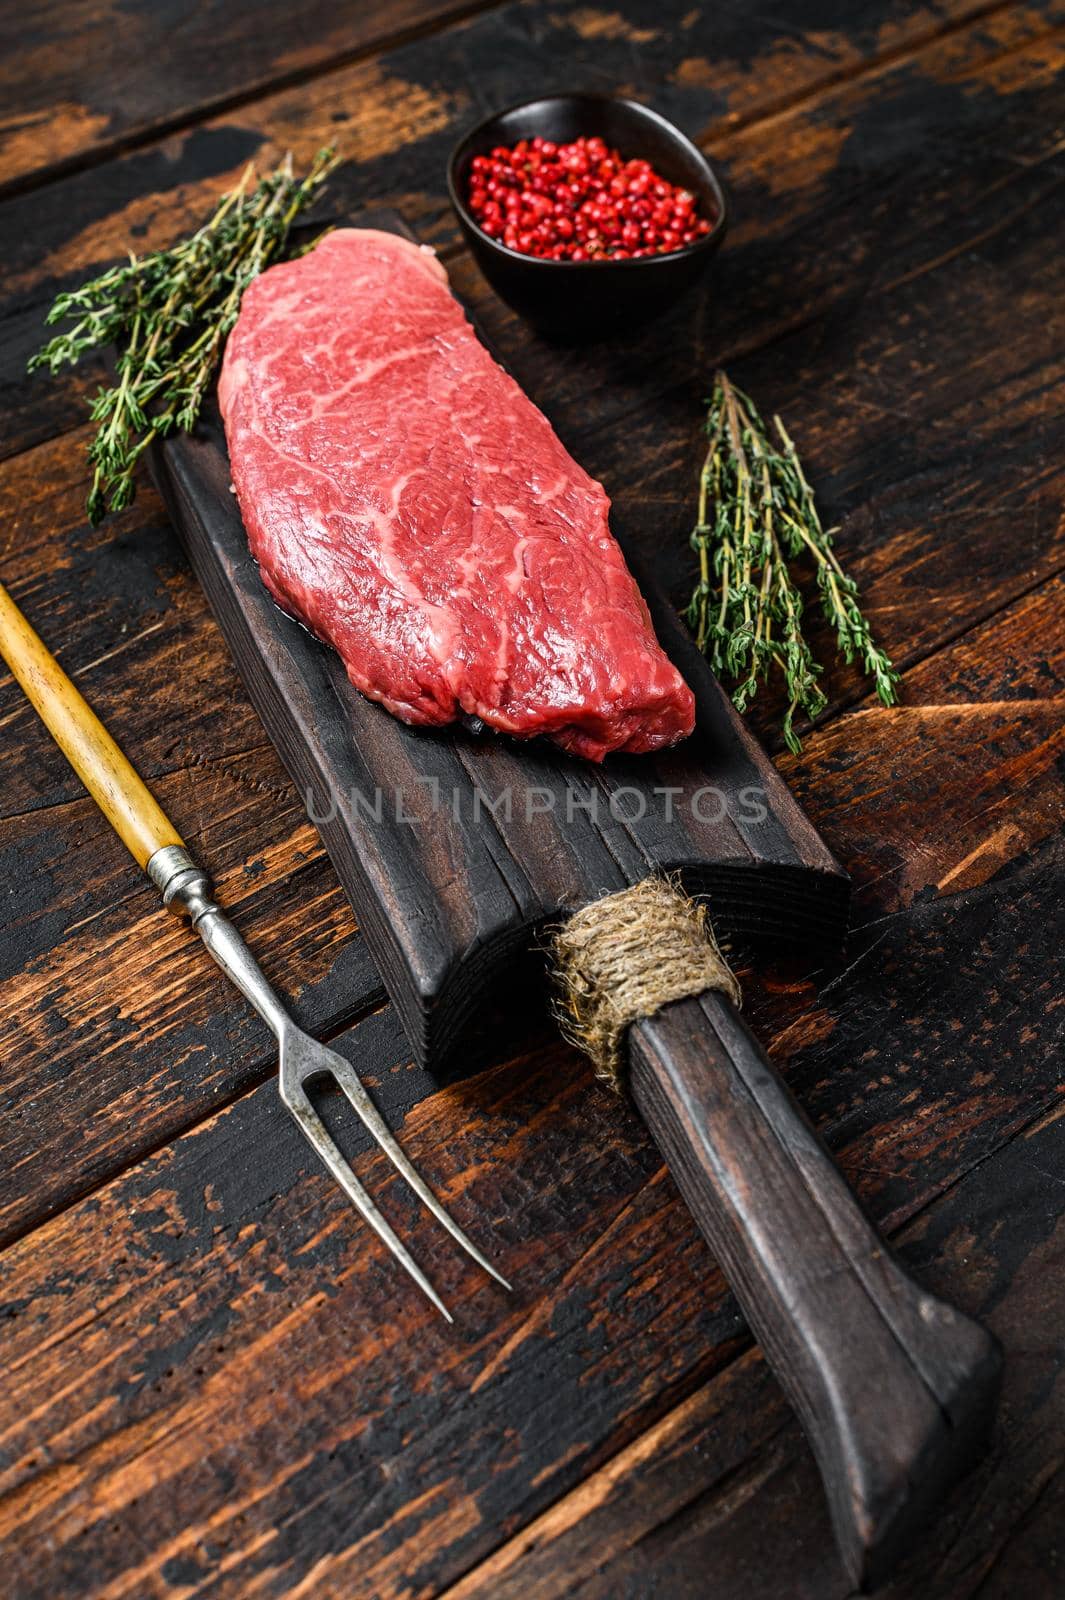 Raw Striploin steak on a cutting board, marbled beef. Dark Wooden background. Top view by Composter